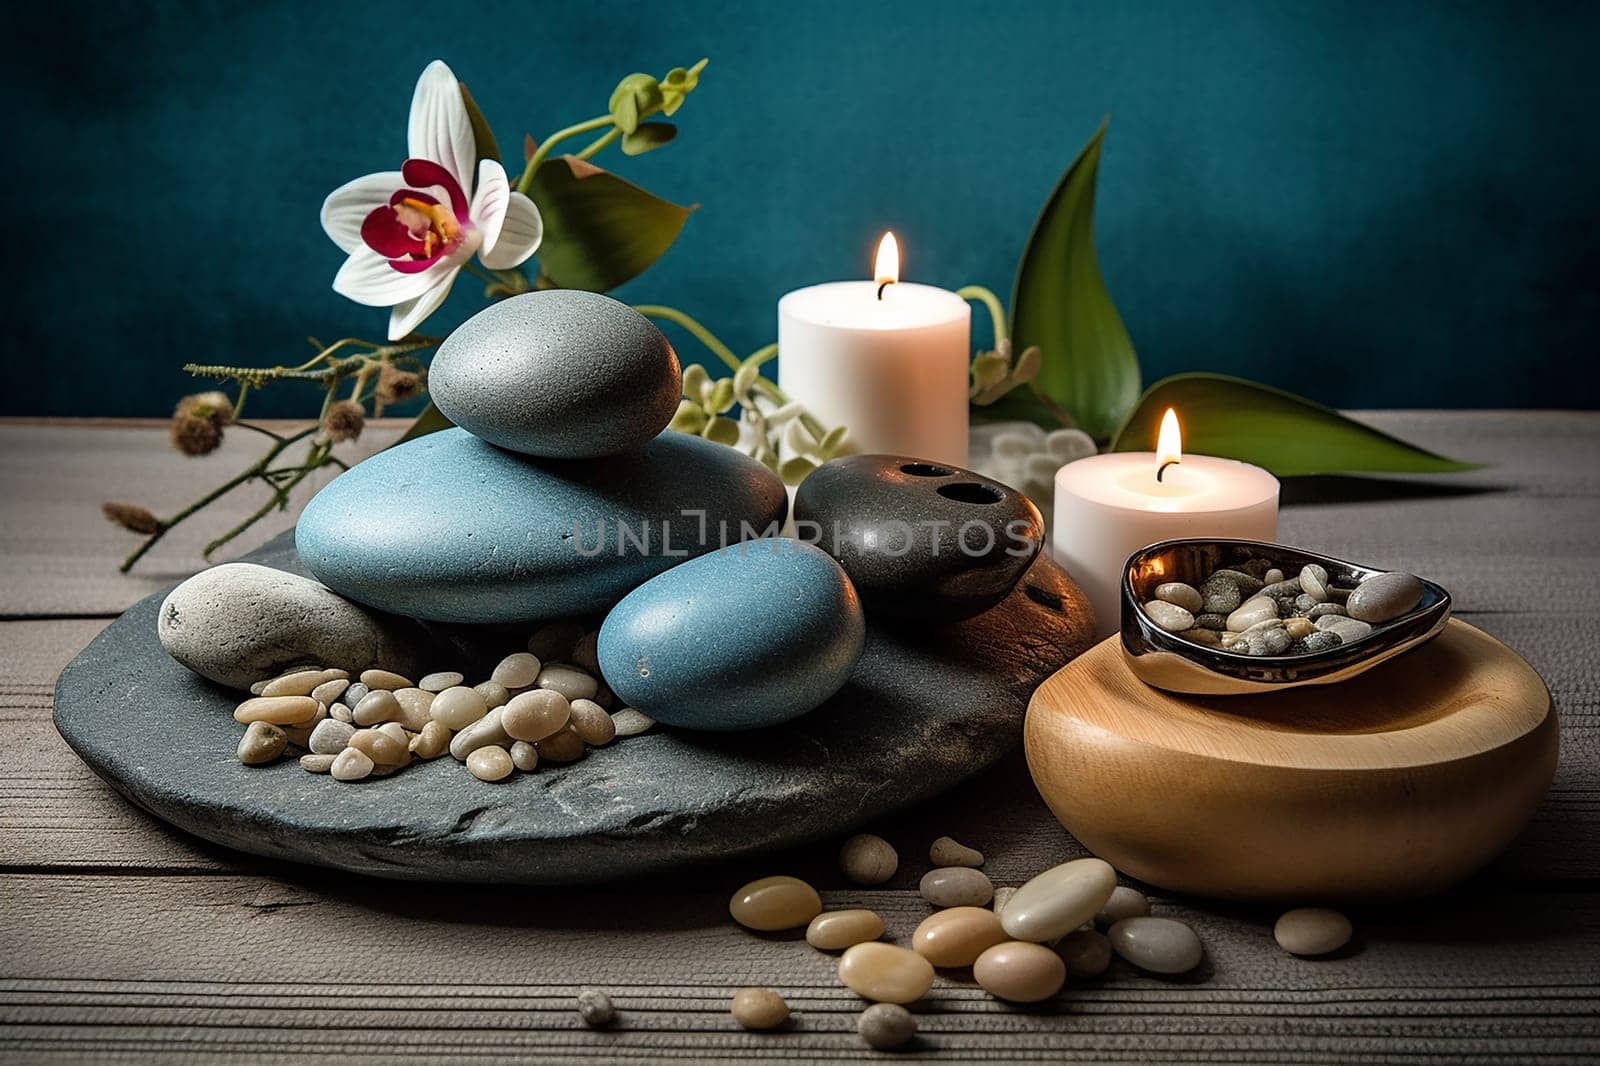 Soothing spa setting with candles, stones, and an orchid on a serene backdrop by Hype2art